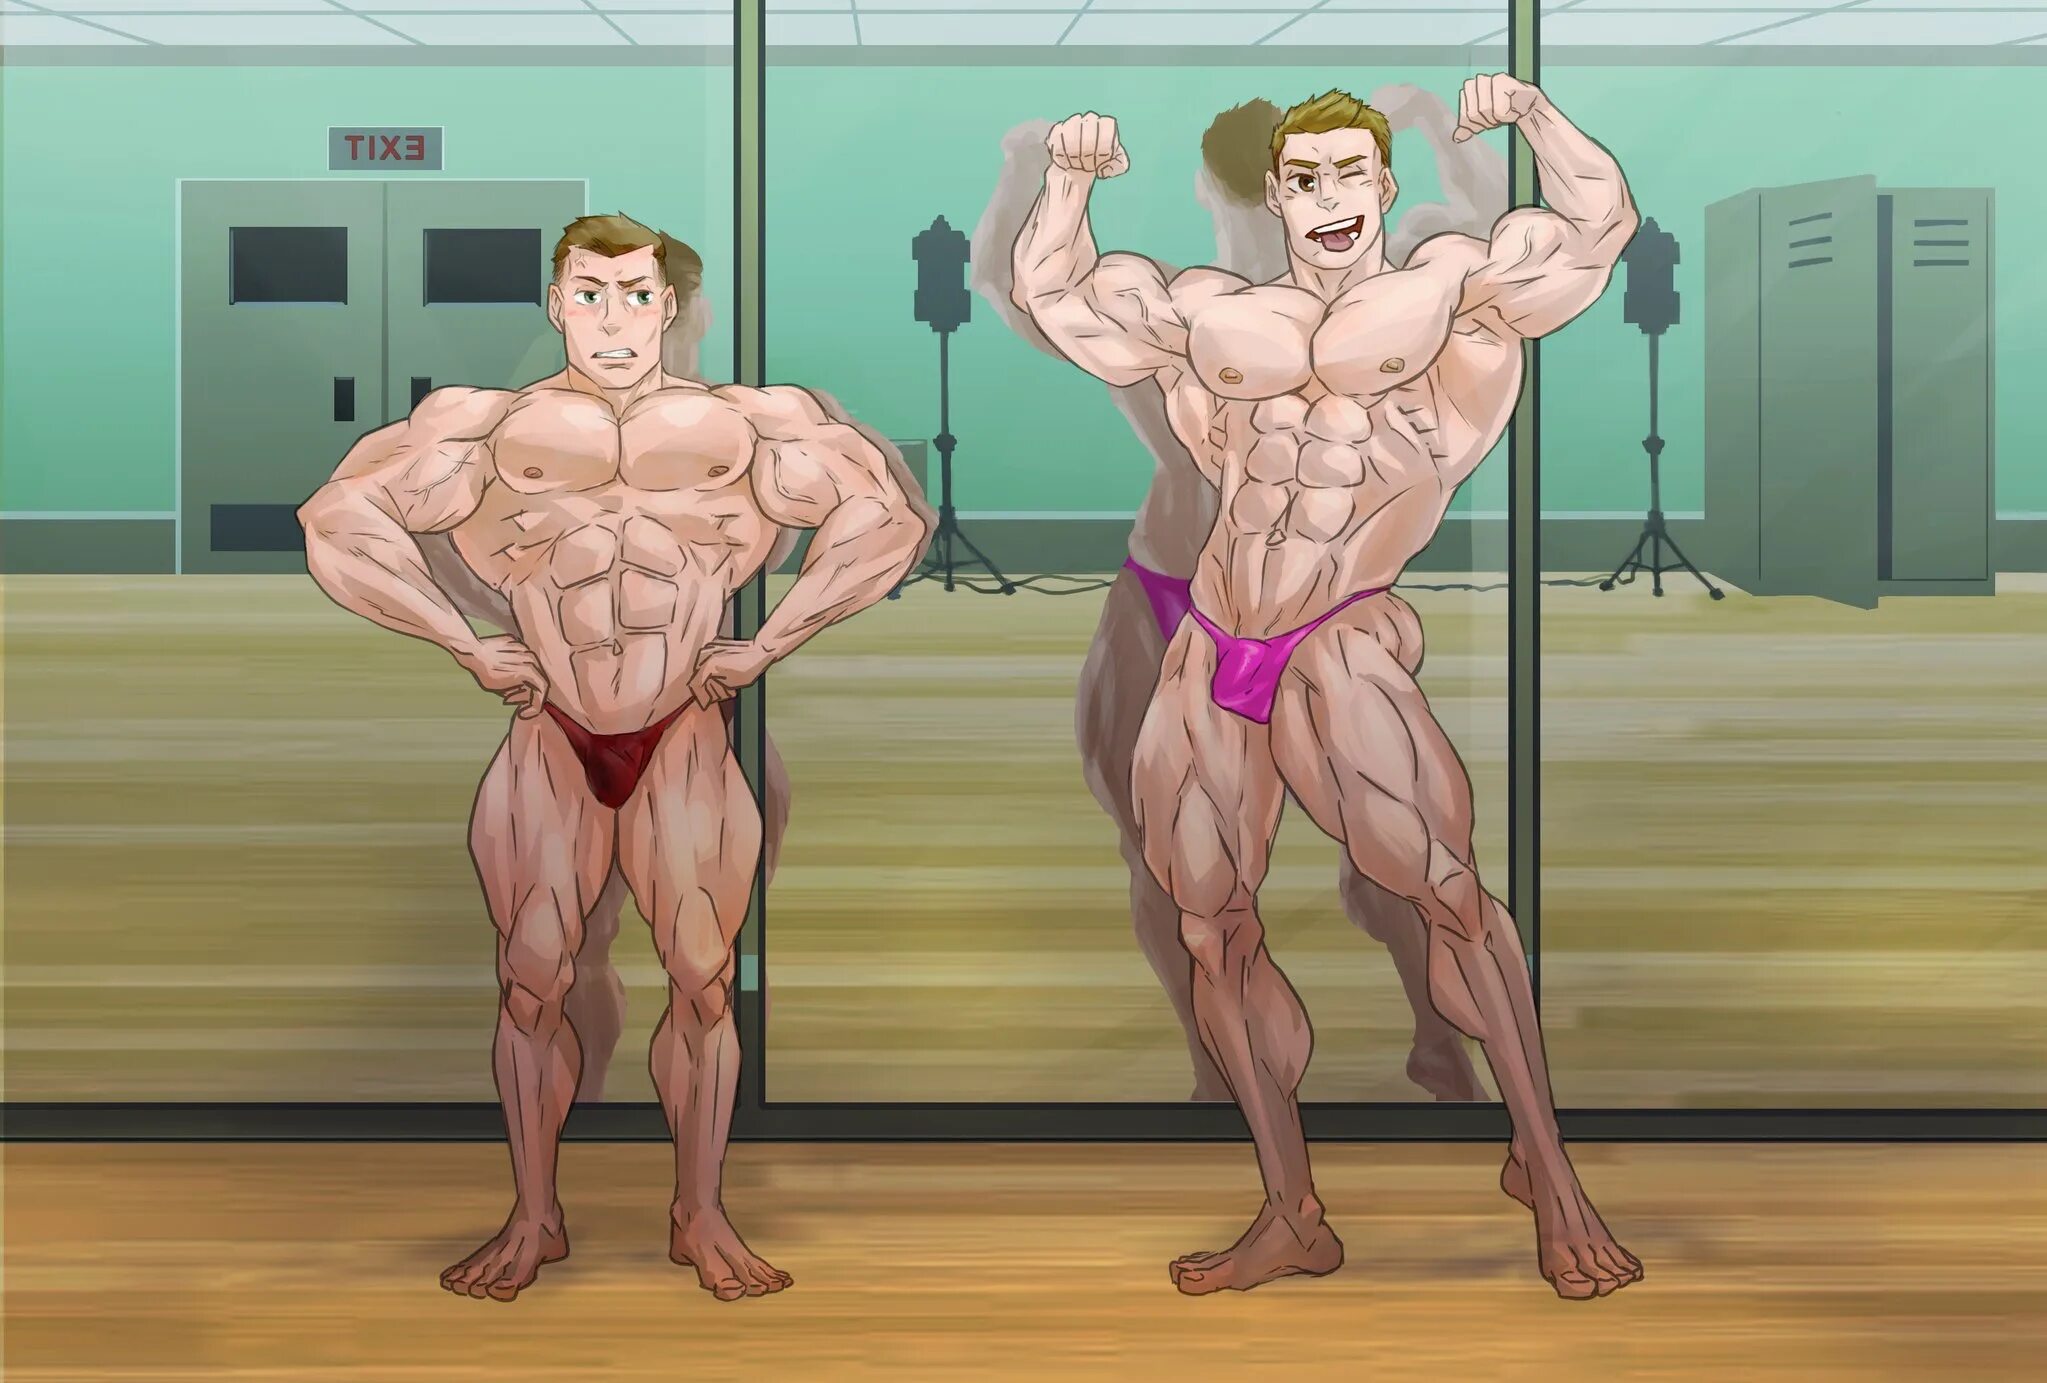 Male comics. Muscle growth Дэнни. Виктор 3д muscle growth boy. Hyper muscle growth Yaoi. Giant muscle growth.